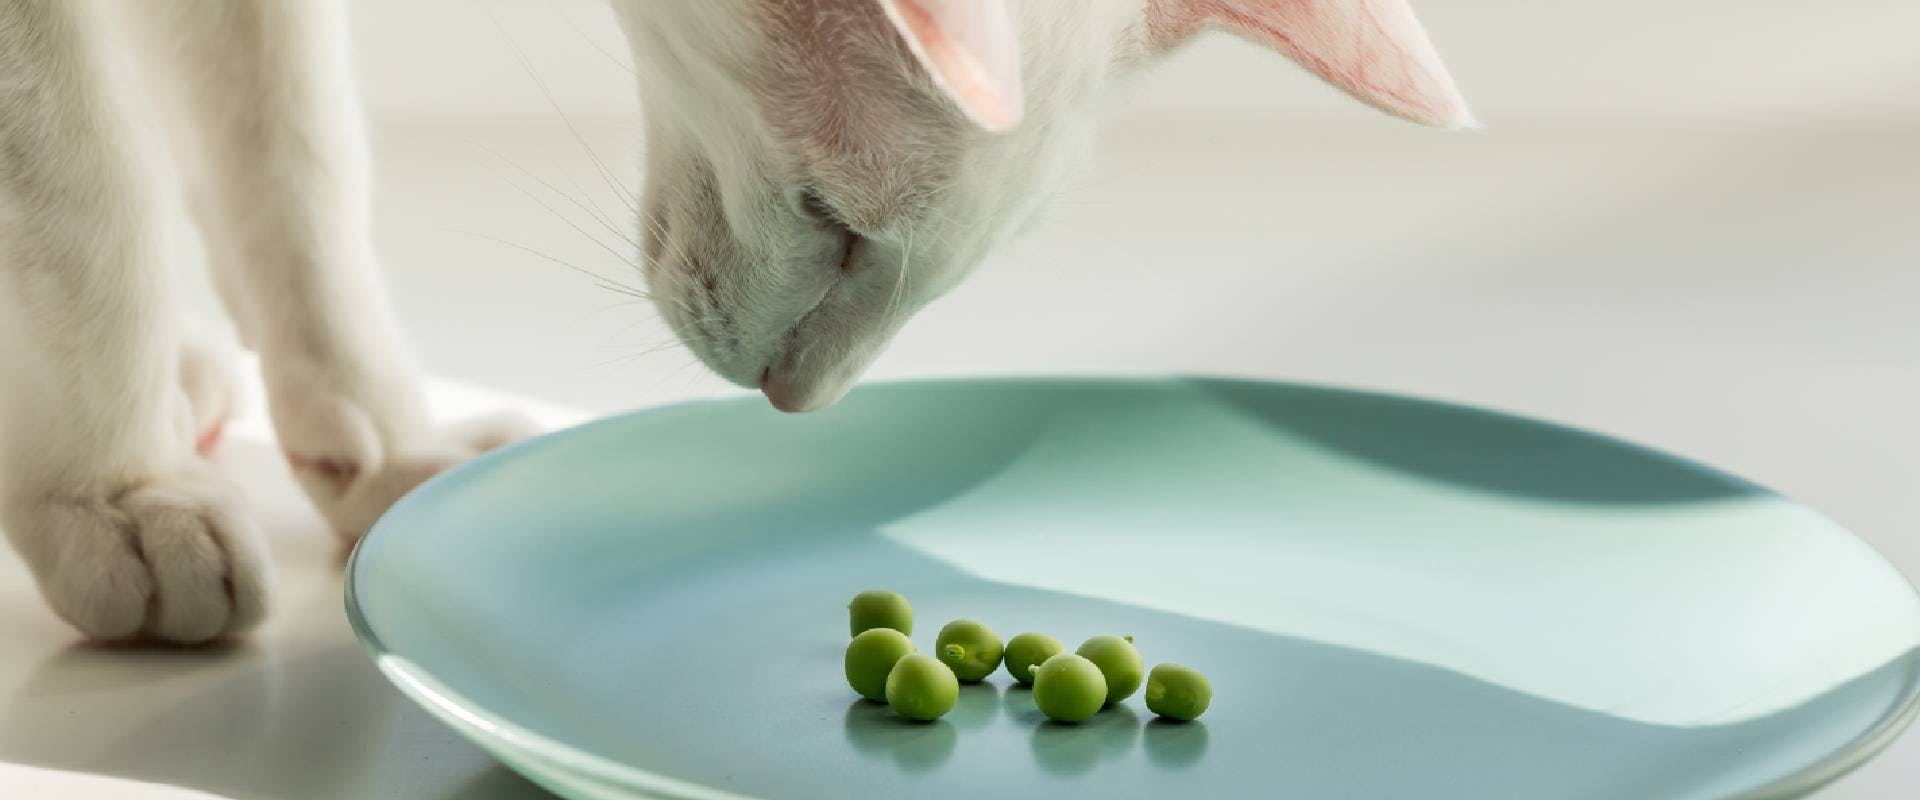 White cat looking at peas on a plate